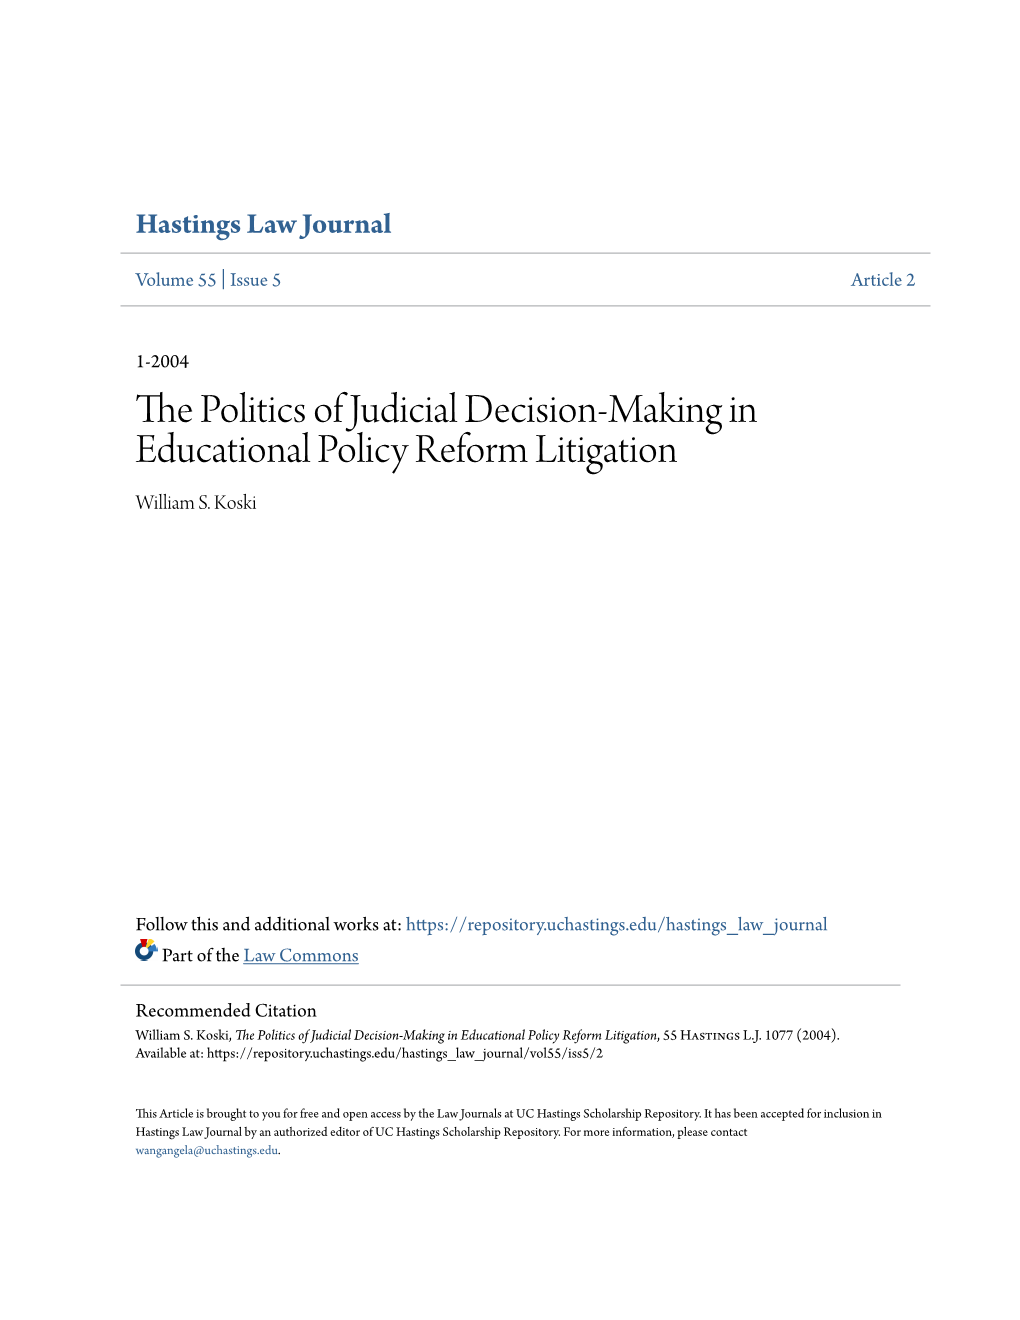 The Politics of Judicial Decision-Making in Educational Policy Reform Litigation, 55 Hastings L.J